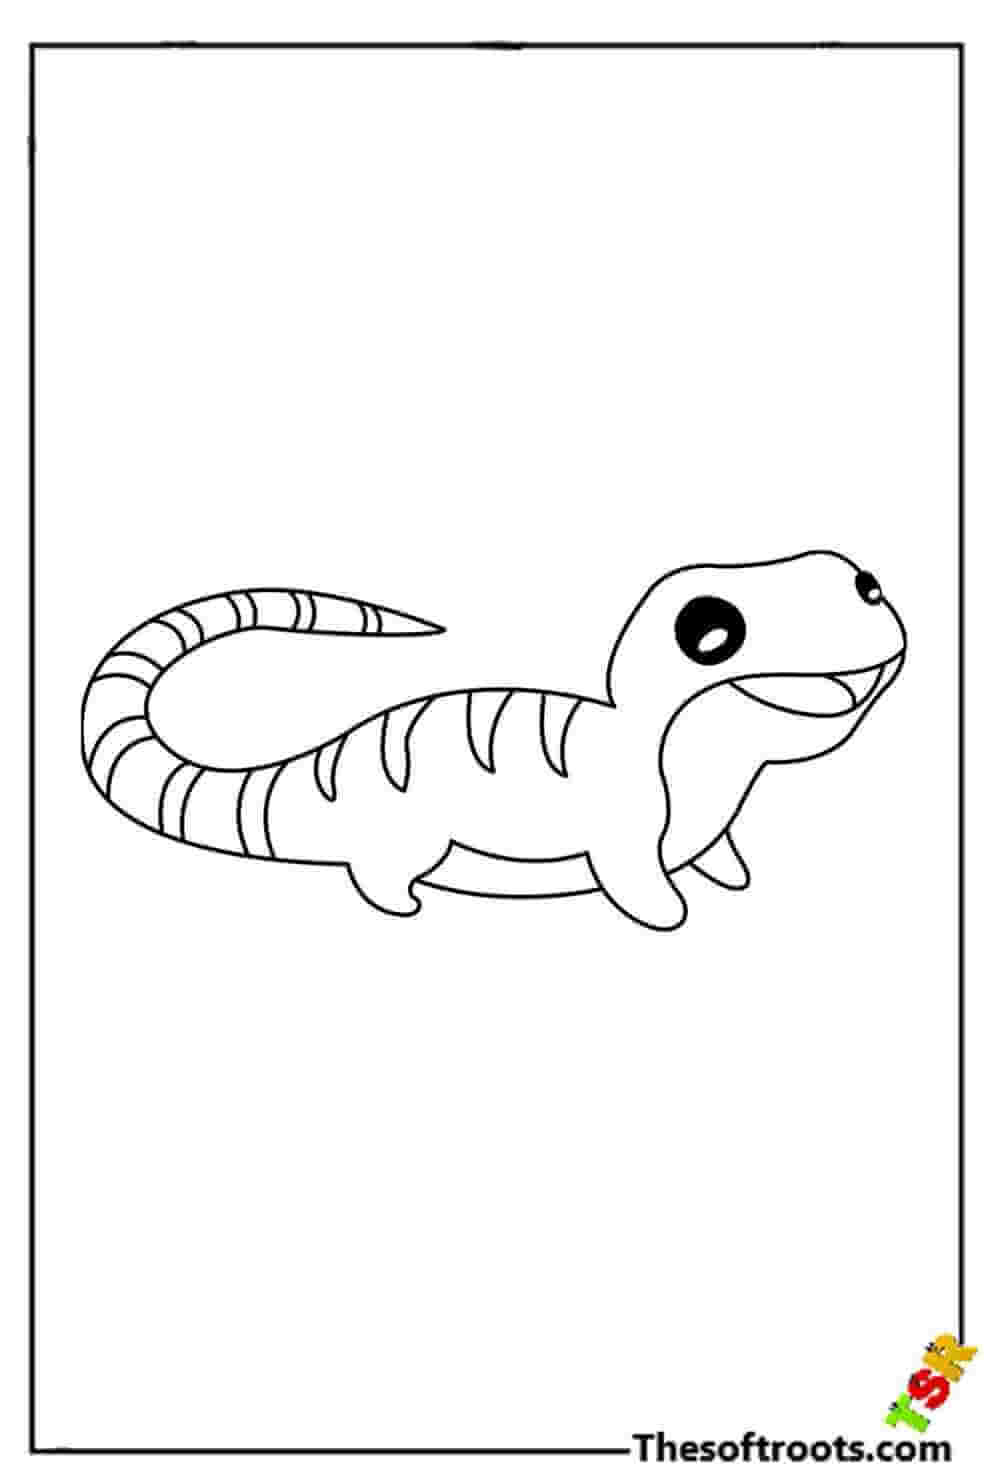 Lizard with a square design coloring pages